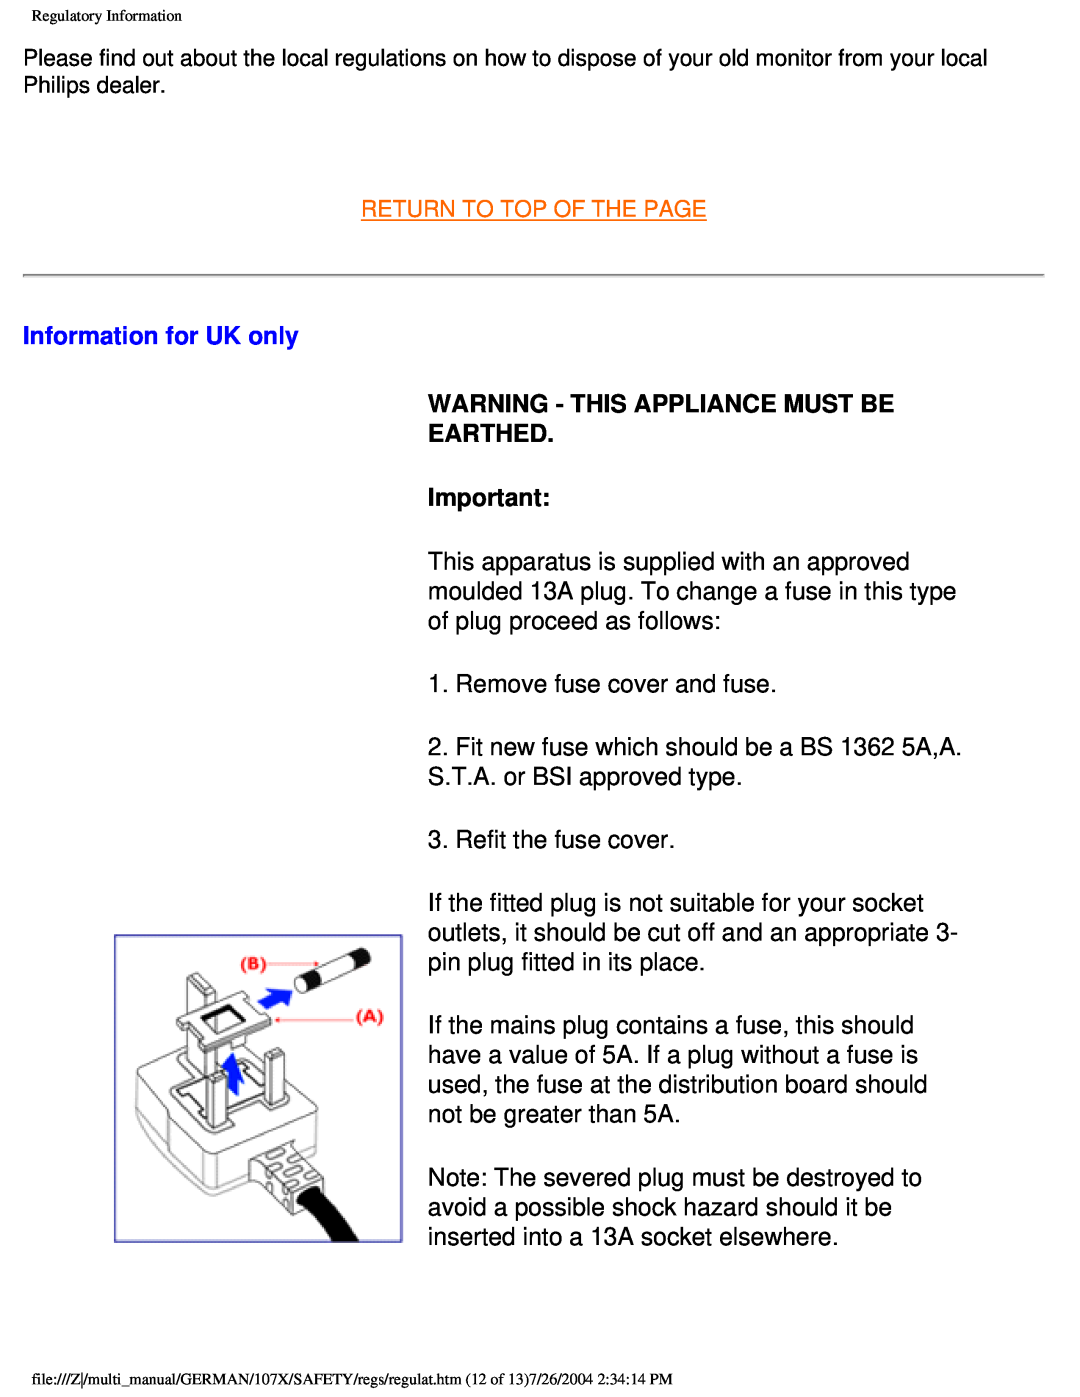 Philips 107X2 user manual Information for UK only, Warning - This Appliance Must Be Earthed 